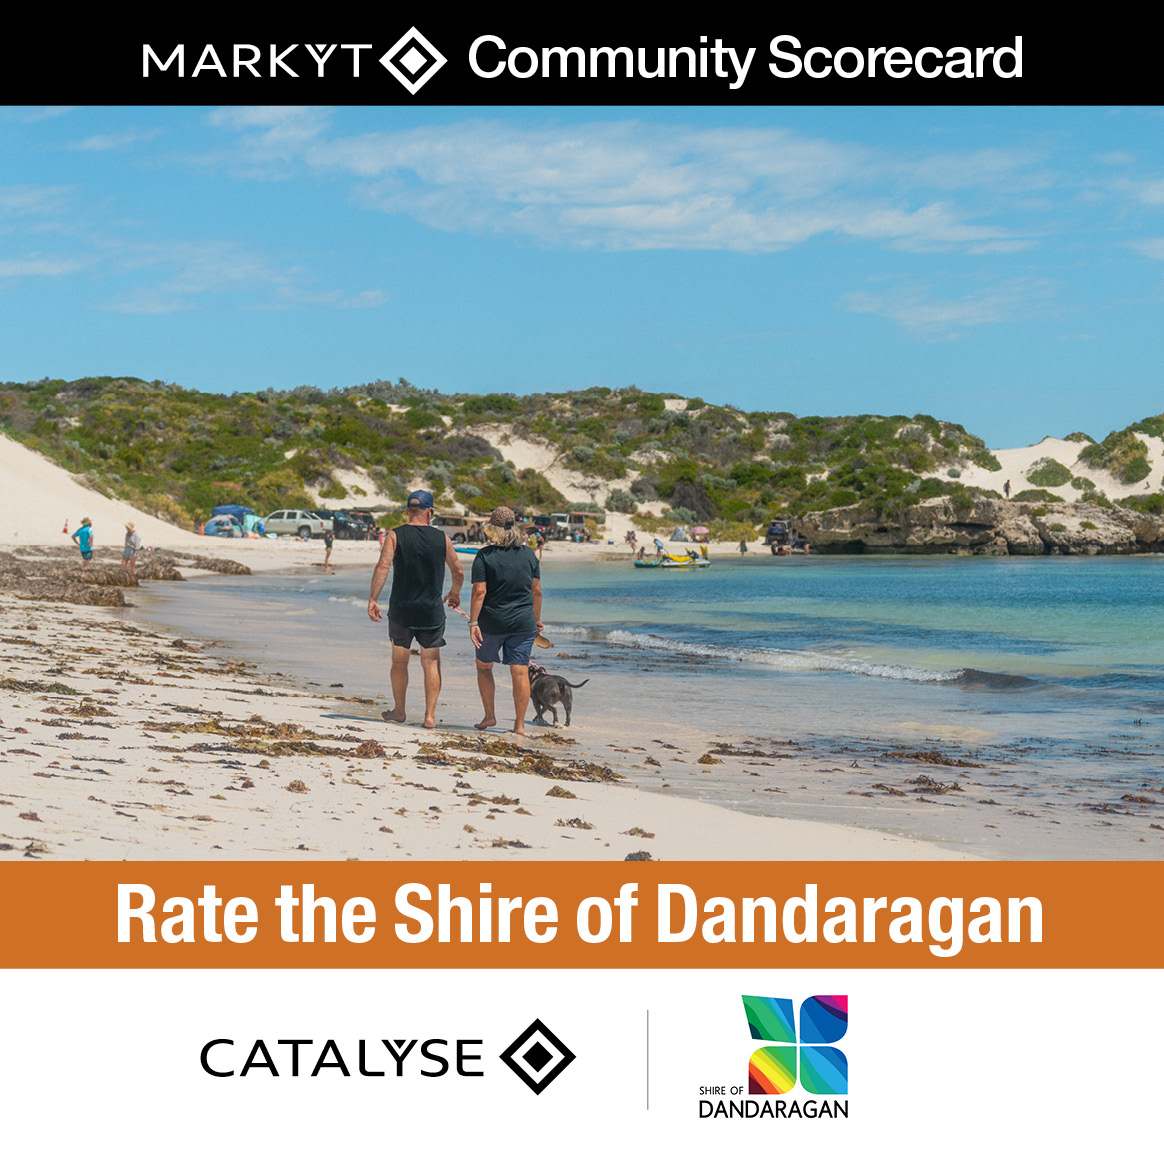 Last Few Days to Rate your Local Area in the Markyt Scorecard